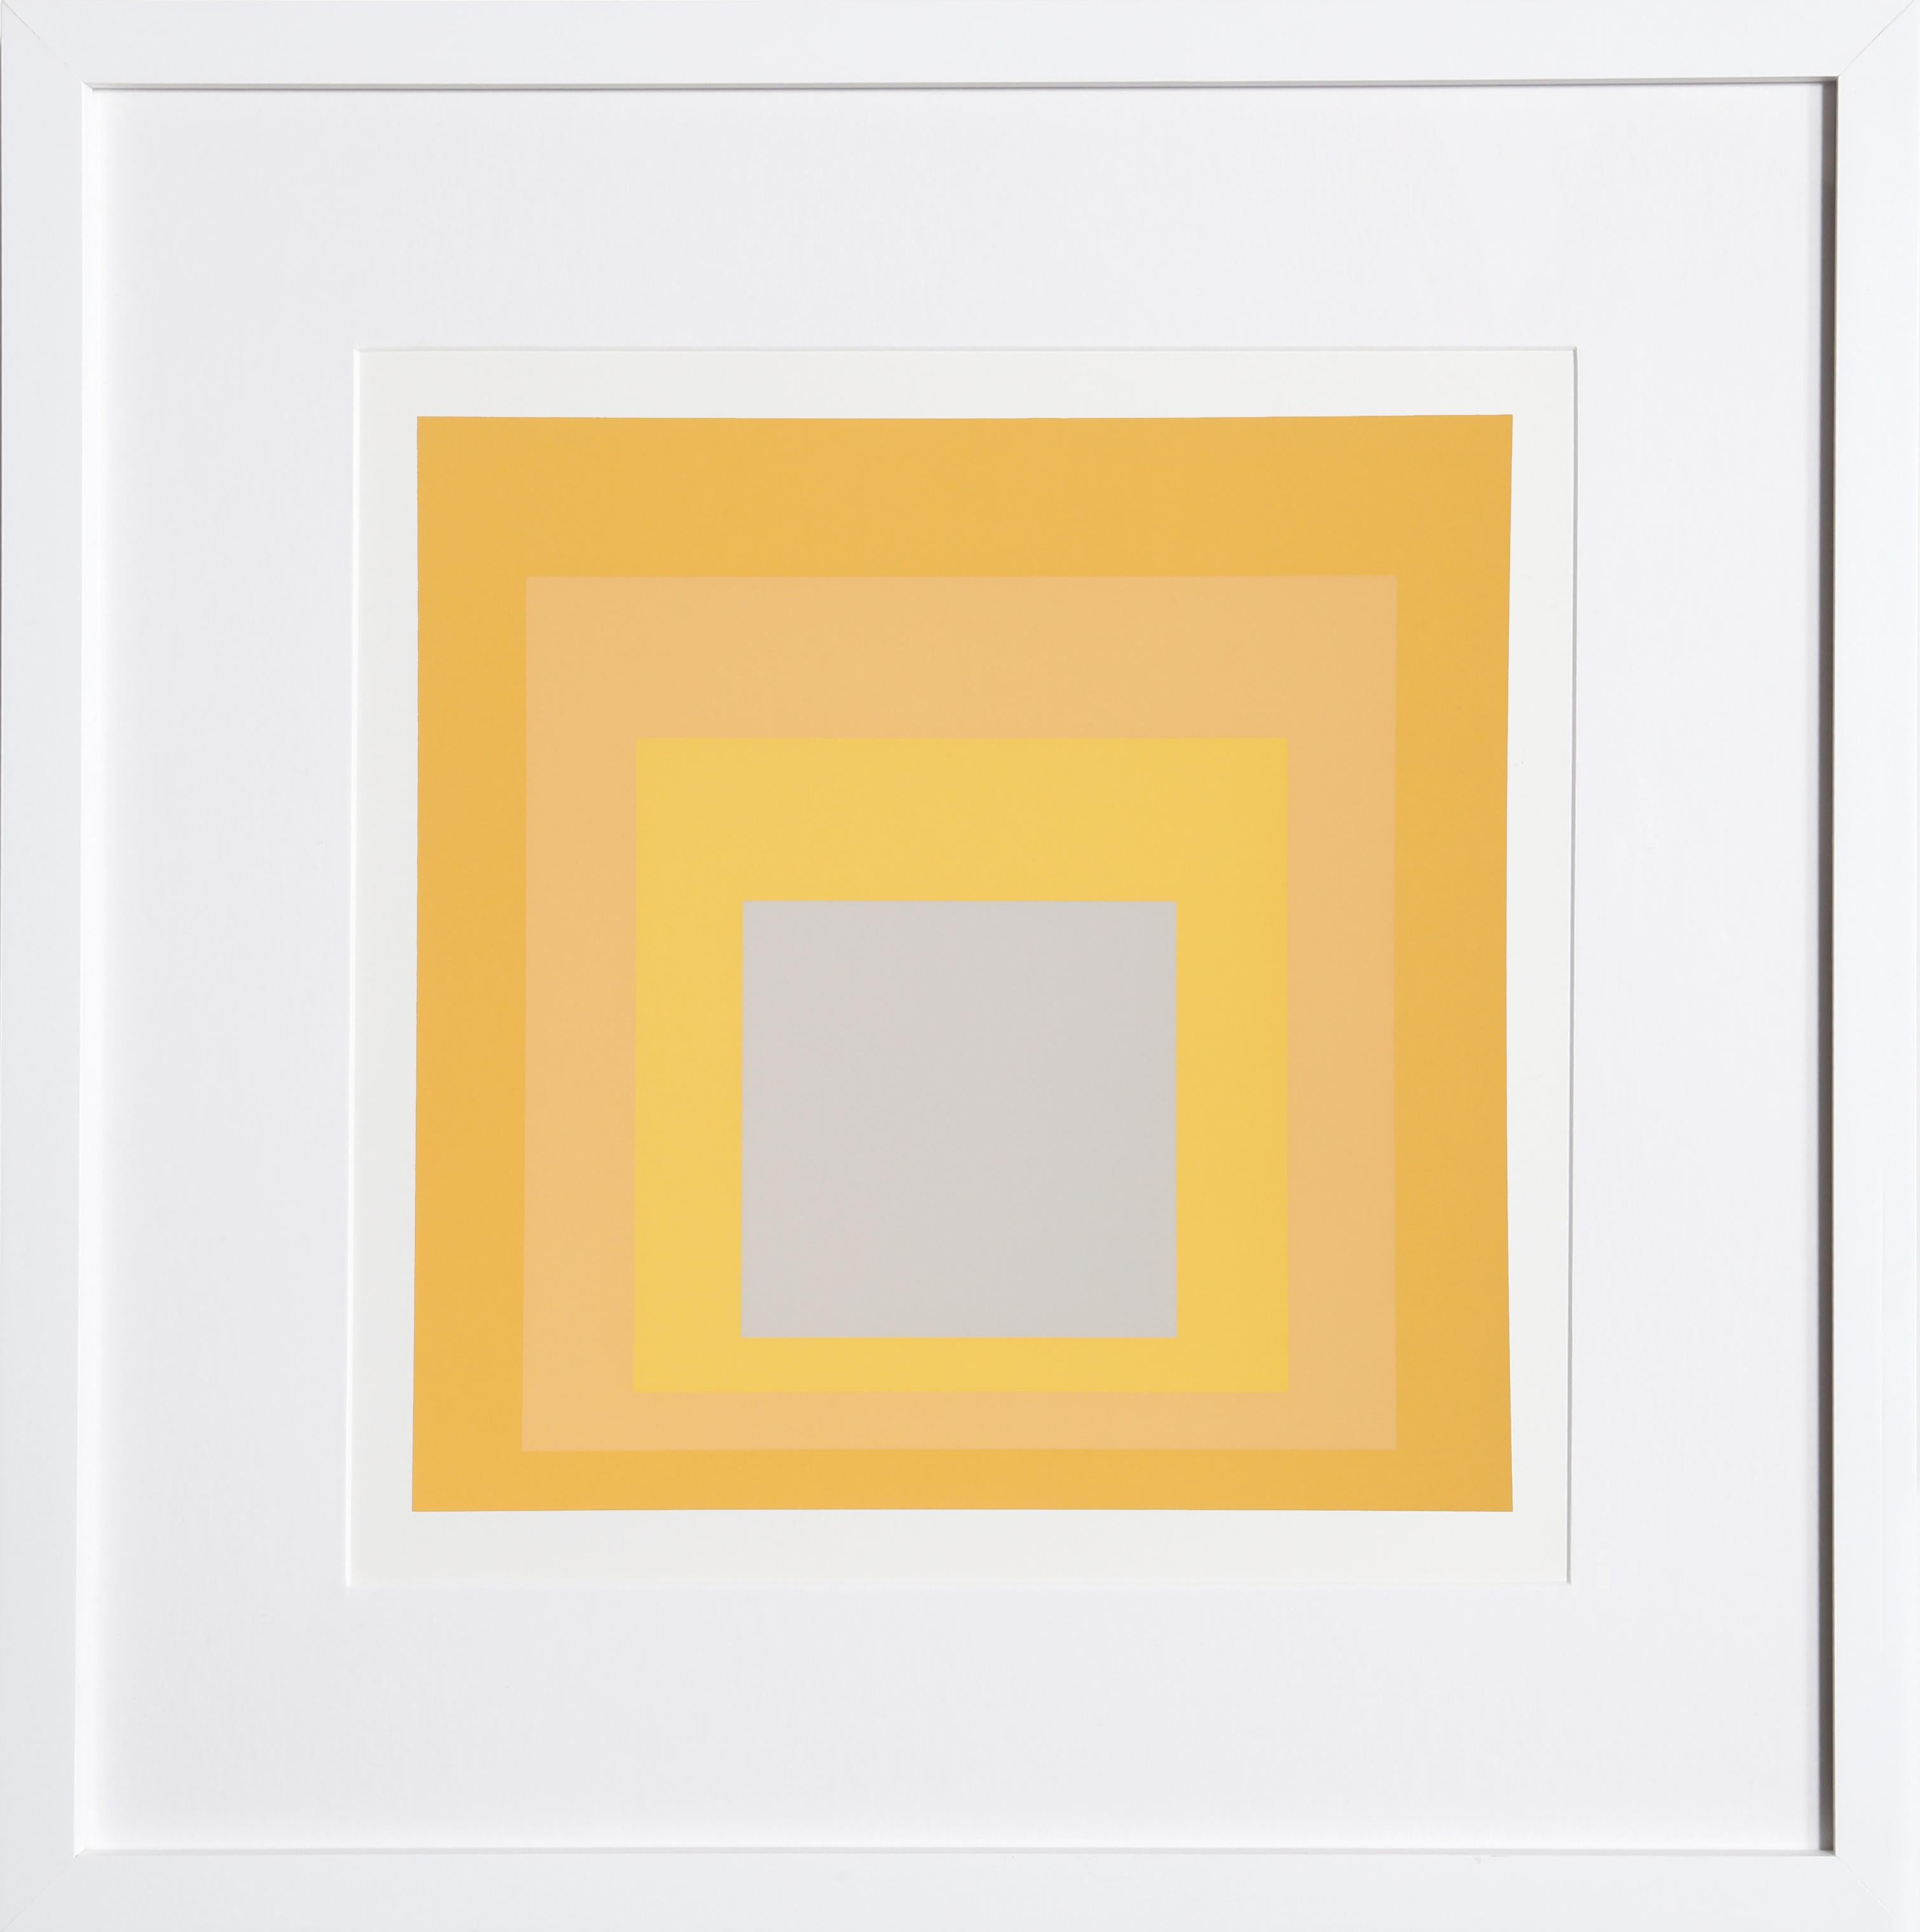 Josef Albers Abstract Print - Homage to the Square - P1, F19, I2